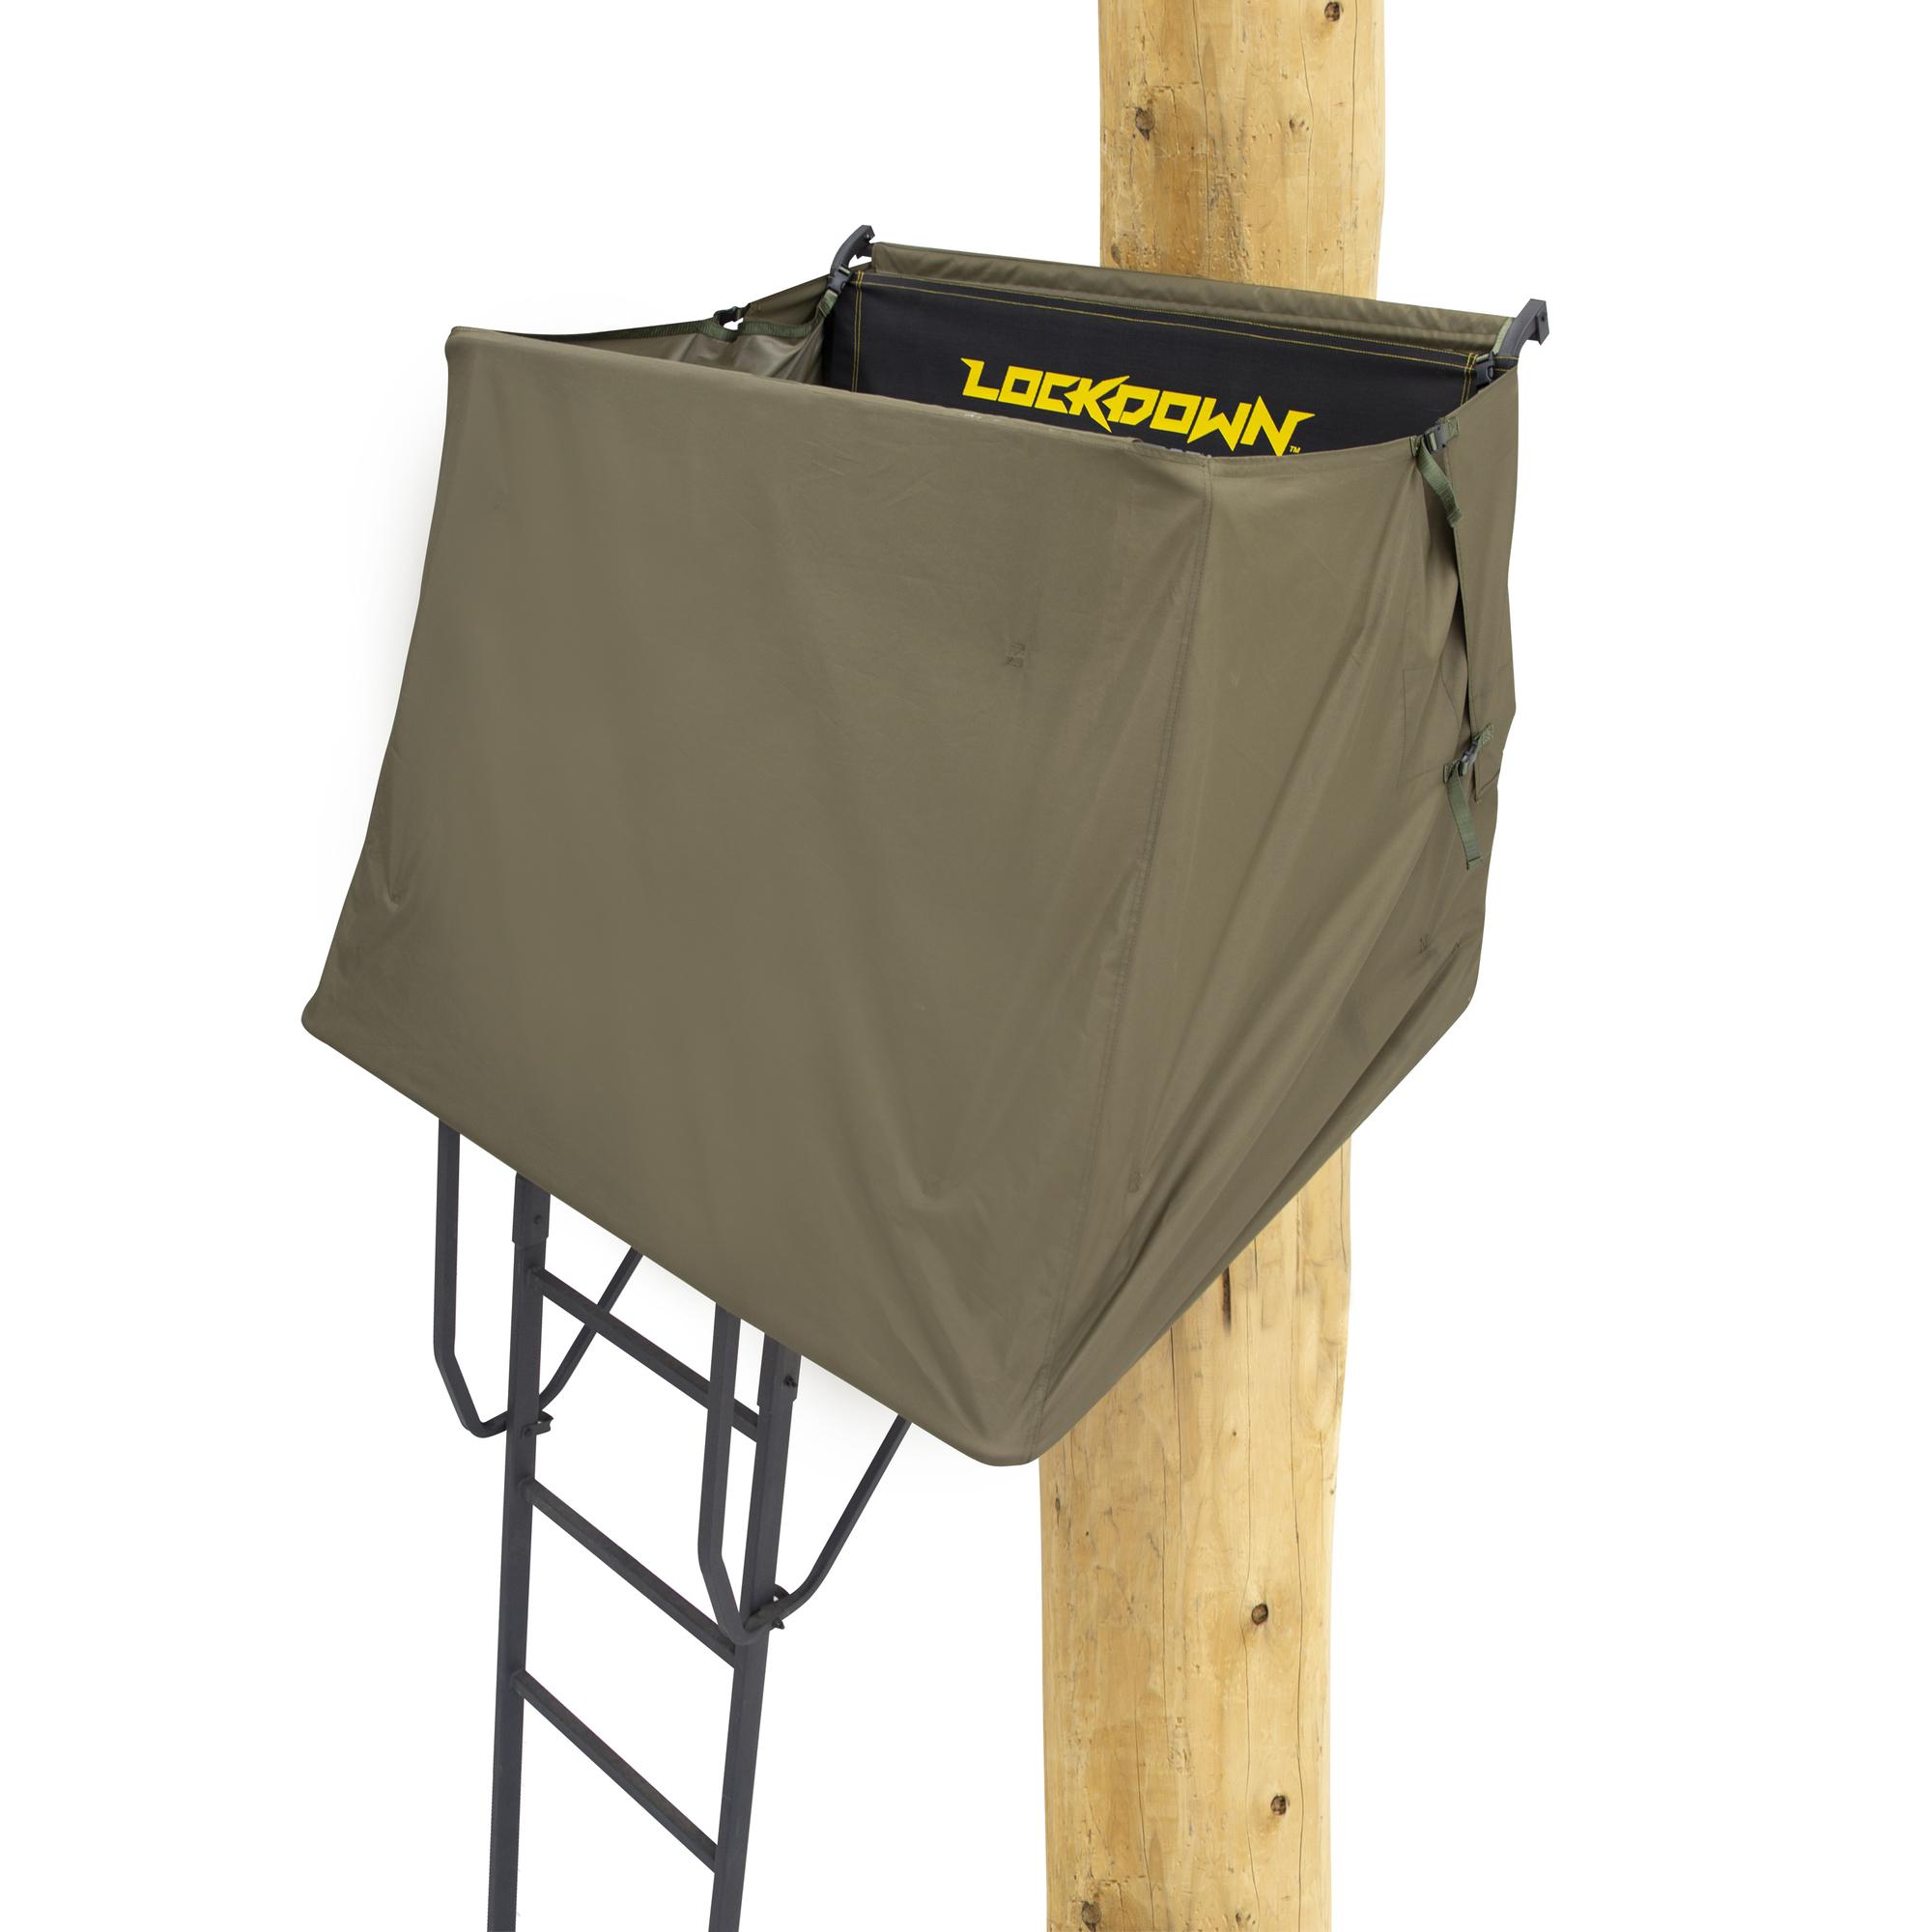 Rivers Edge, Lockdown 2-Man Concealment Kit for Ladder Stands, Capacity 2 Color Brown, Material Other, Model LD702